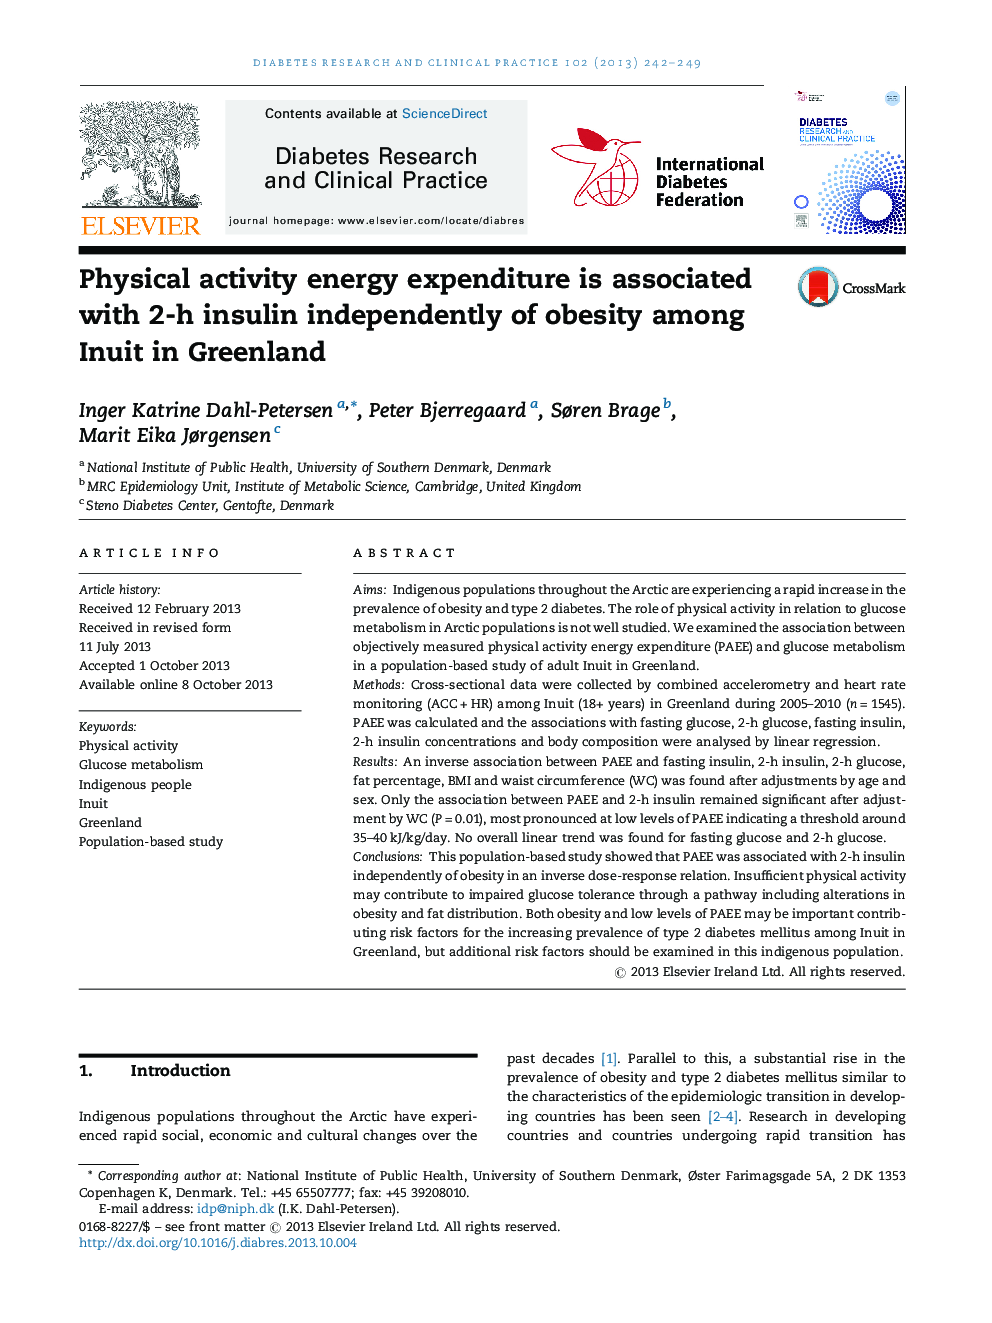 Physical activity energy expenditure is associated with 2-h insulin independently of obesity among Inuit in Greenland